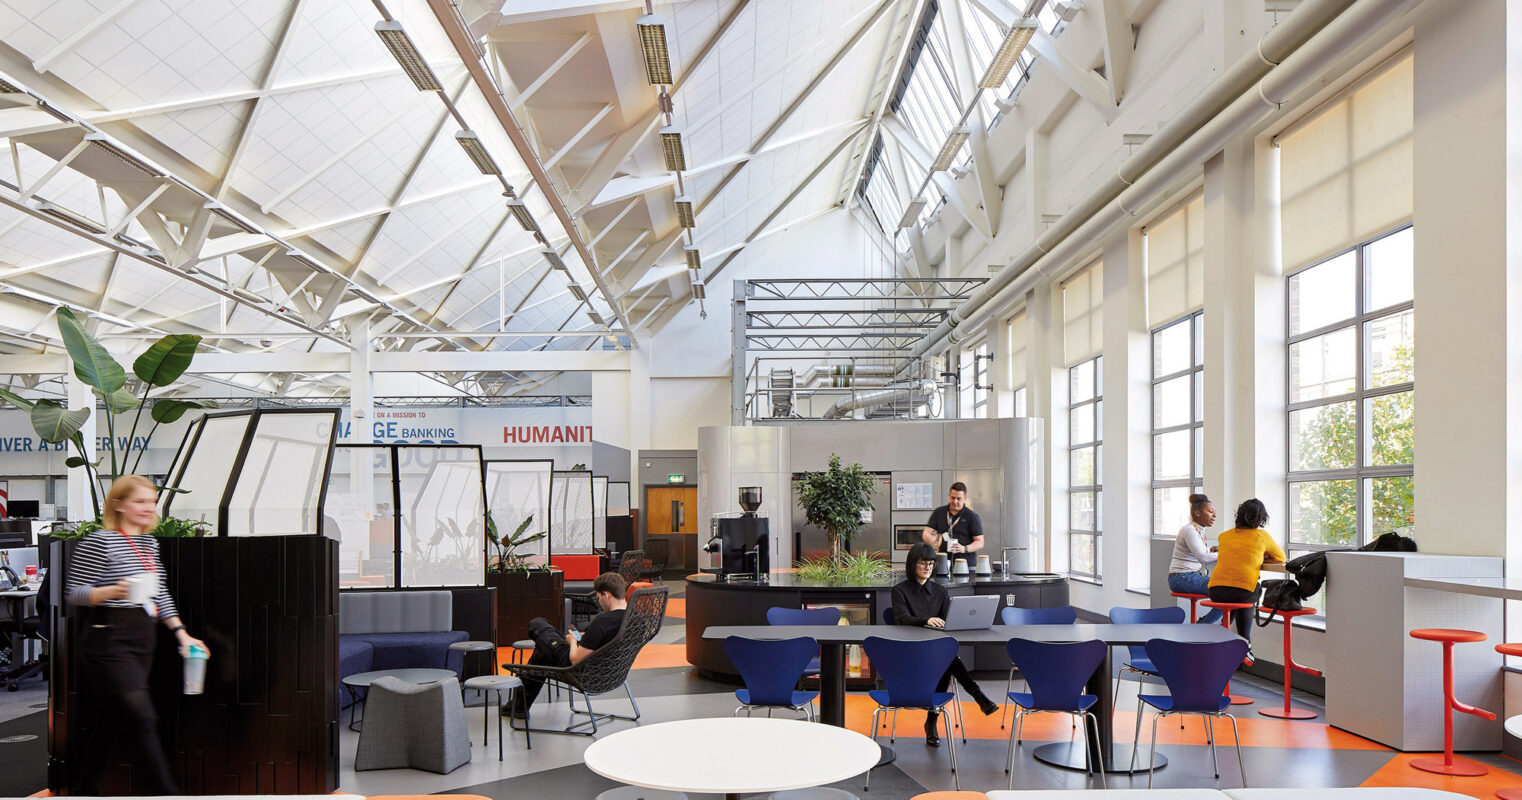 Bright, open-plan office space with high white ceilings and skylights that allow natural light to flood the interior. The layout features a mix of casual seating areas with vibrant orange and blue chairs, communal worktables, and private, black-paneled work pods, promoting a flexible and modern work environment.